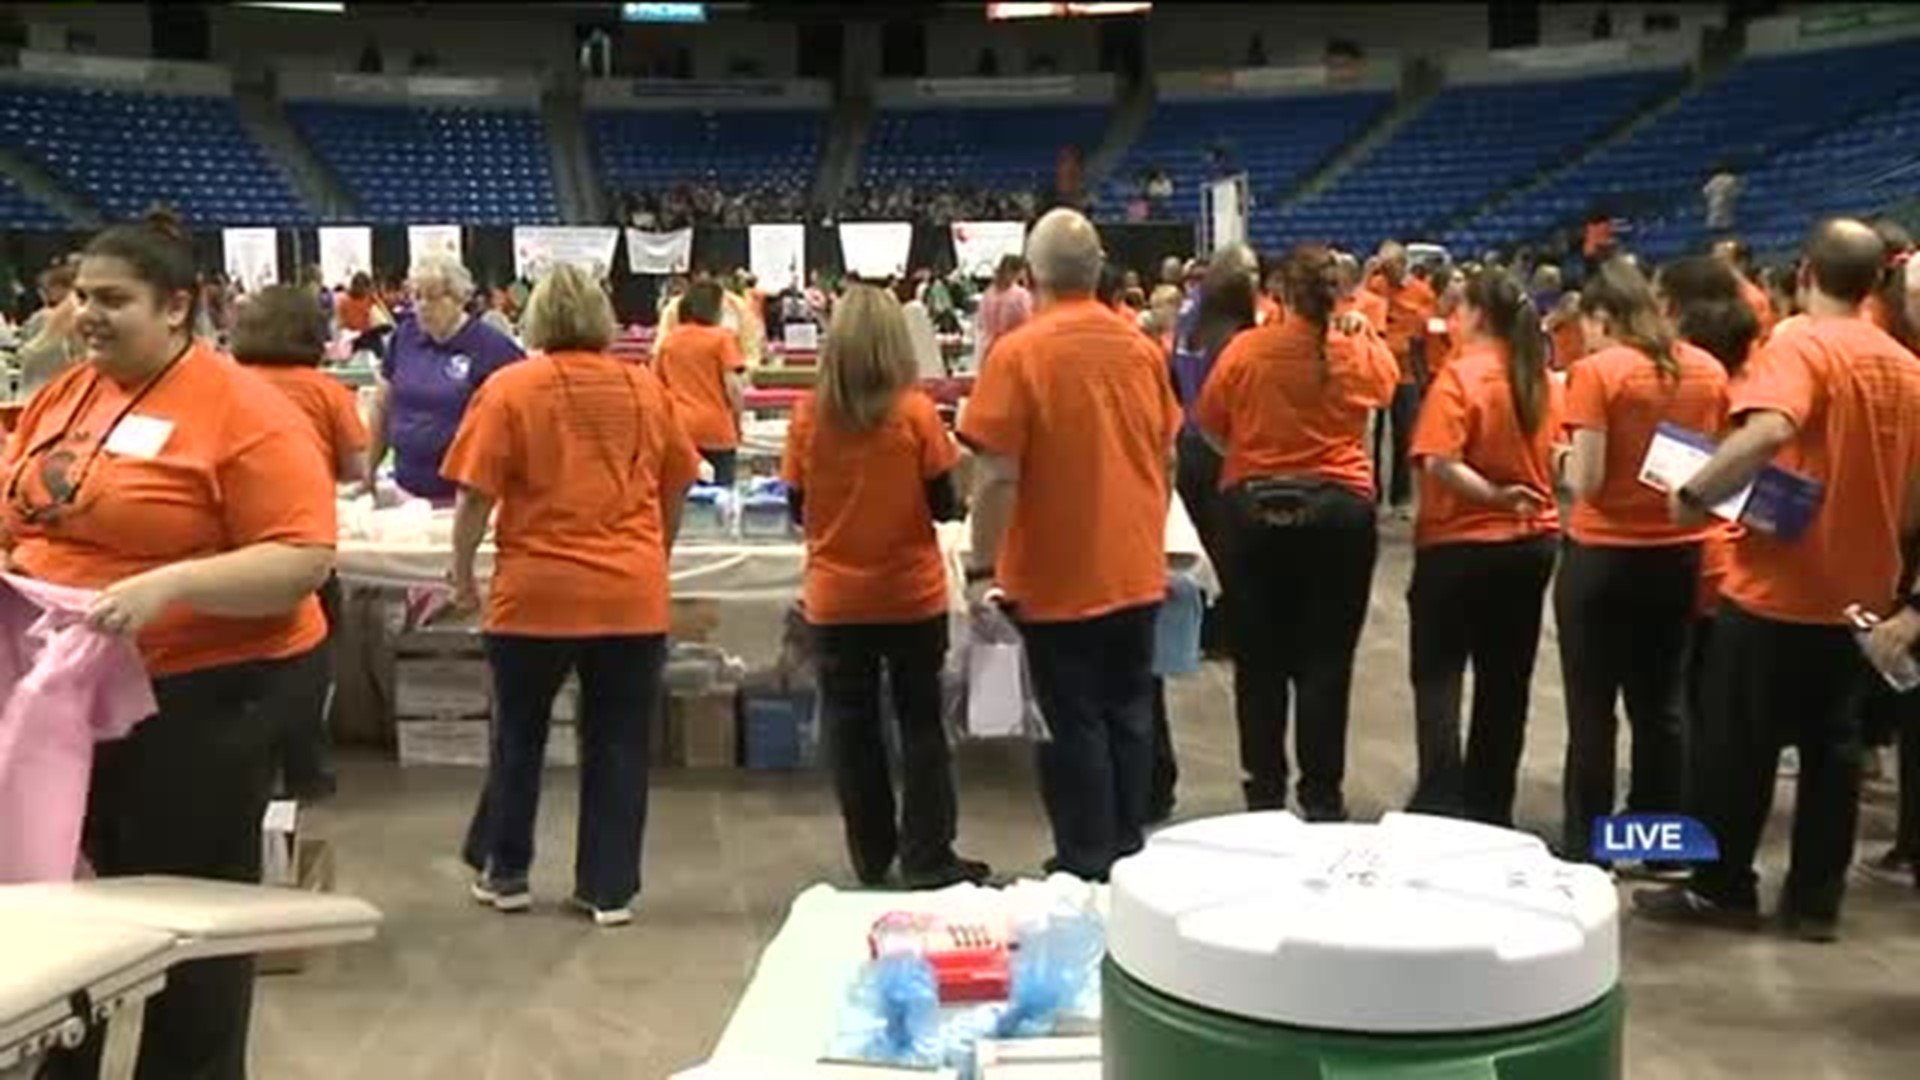 'MOM-n-PA' Provides Free Dental Care to Thousands